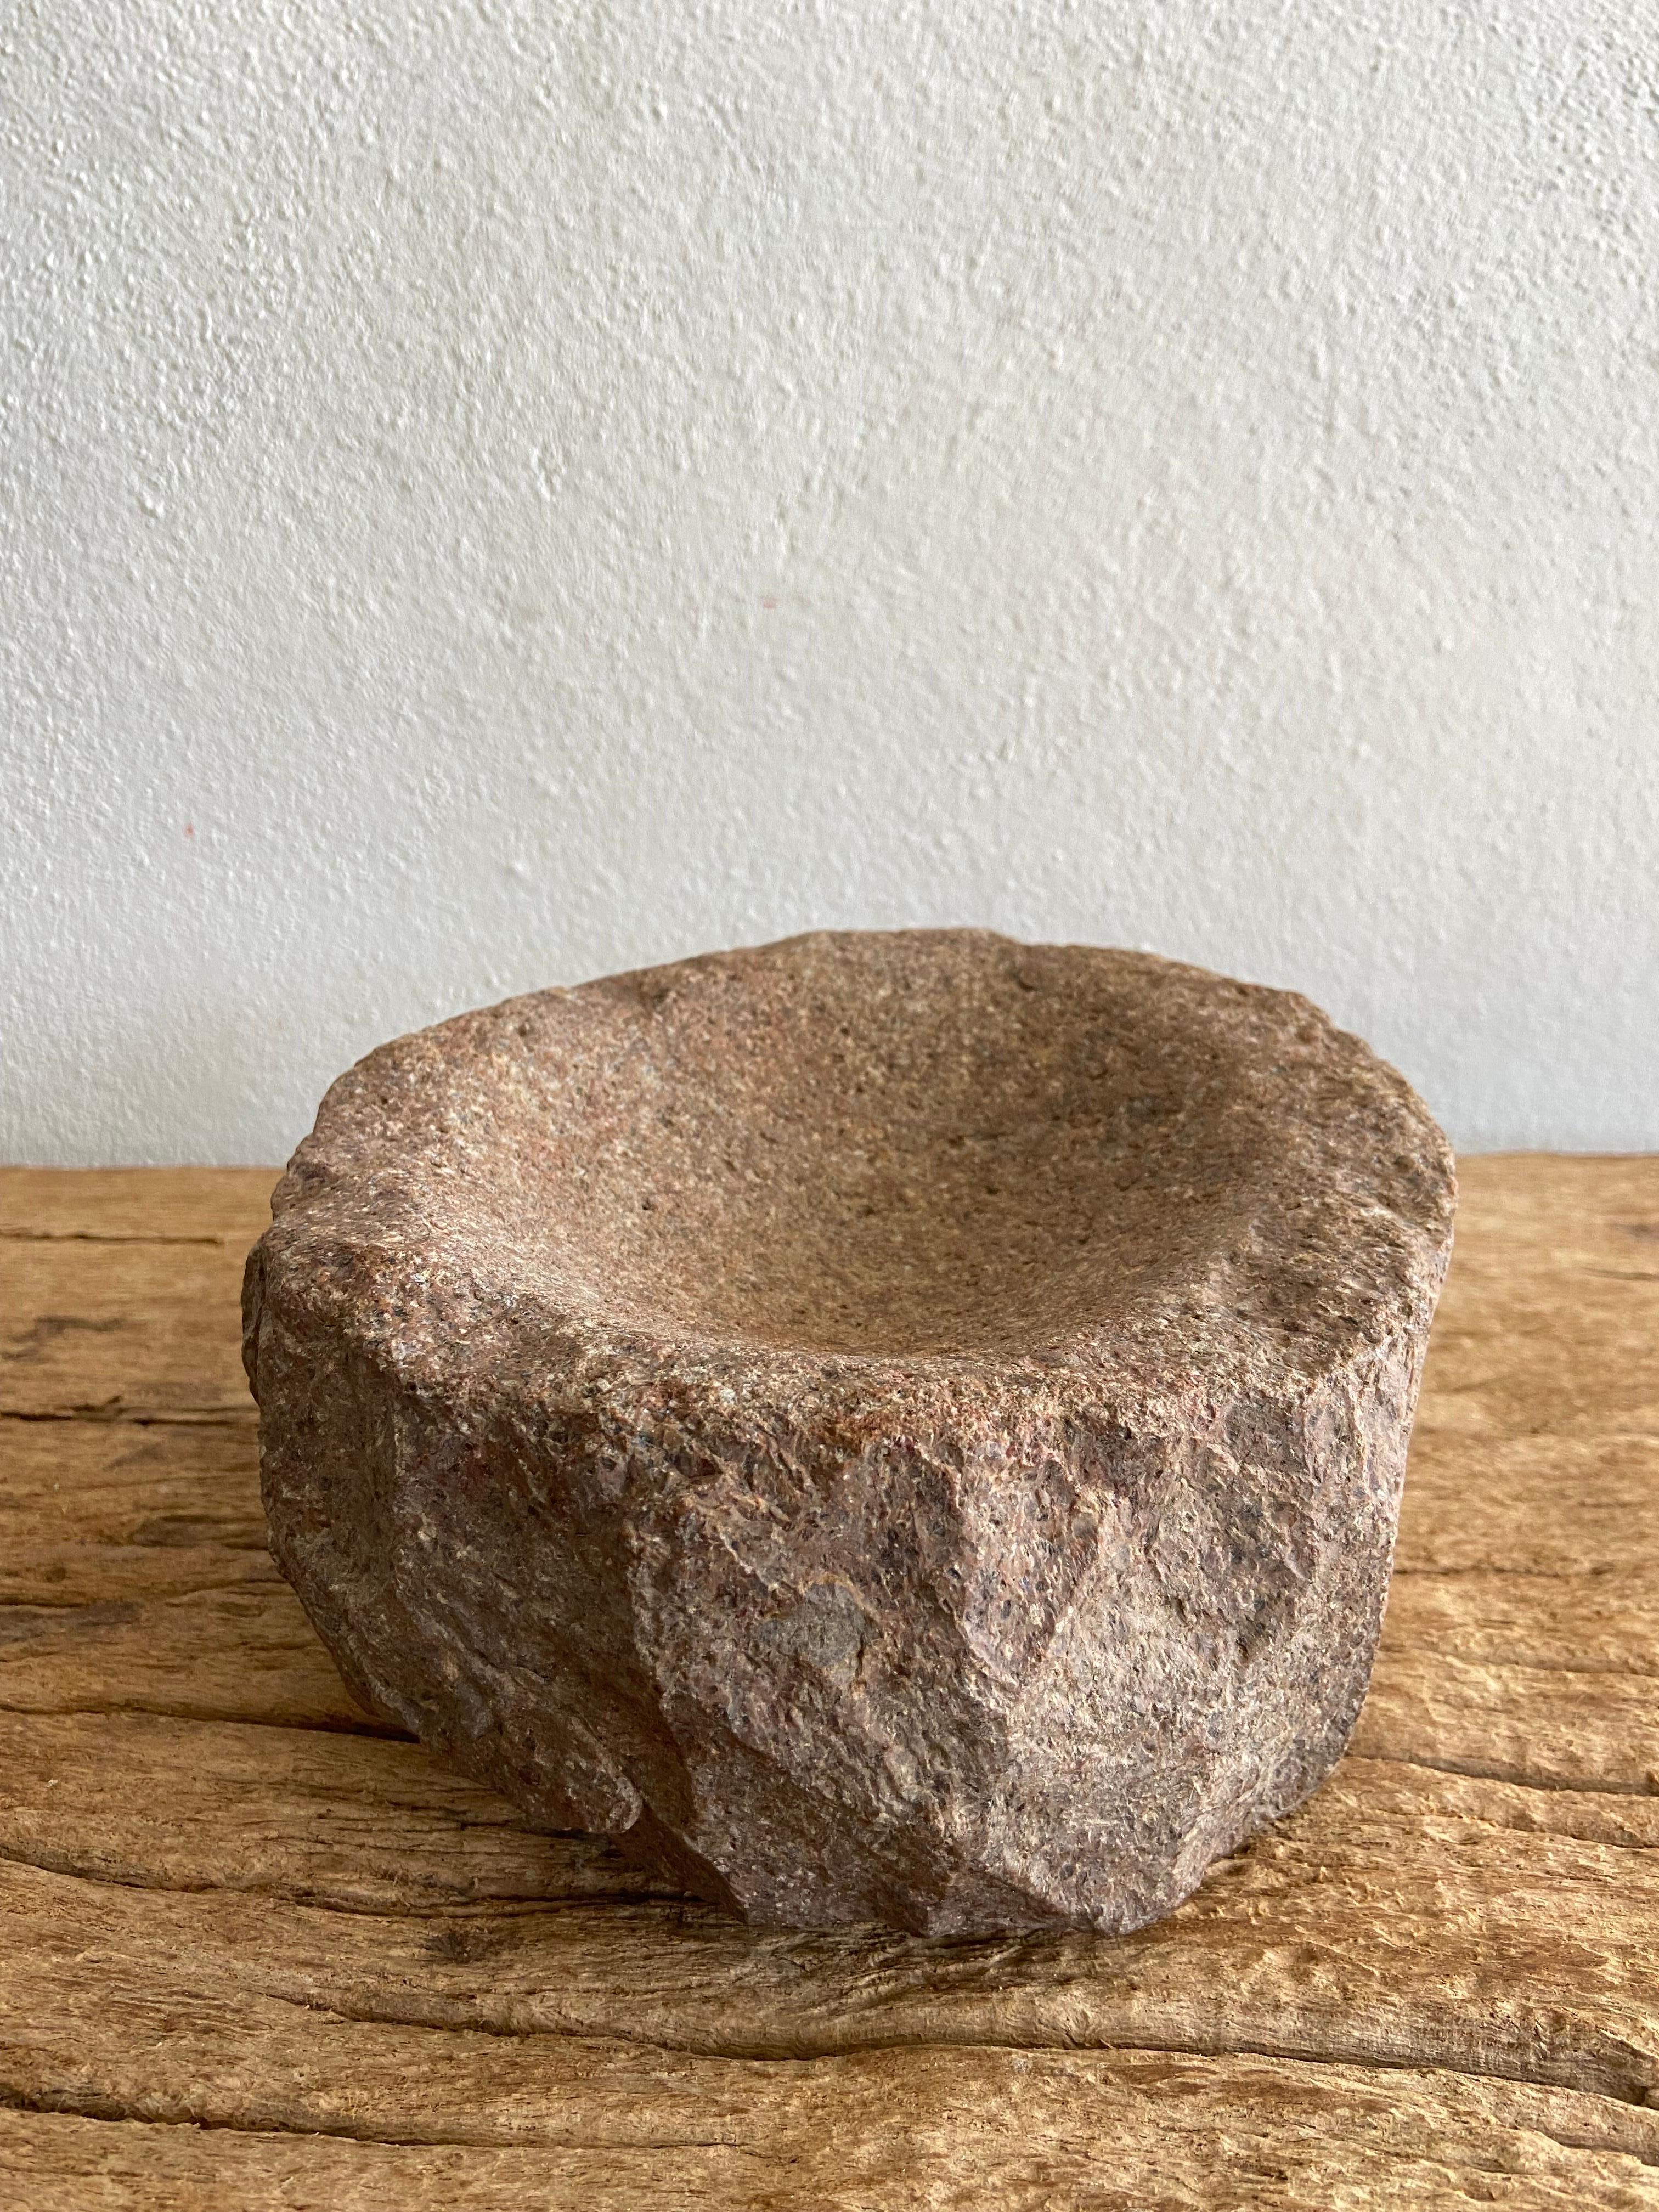 Hand-carved riverstone trough from Central Mexico, circa 1920´s. Slightly larger than an ashtray, the stone used is almost as heavy and dense as granite. Nice rudimentary form.